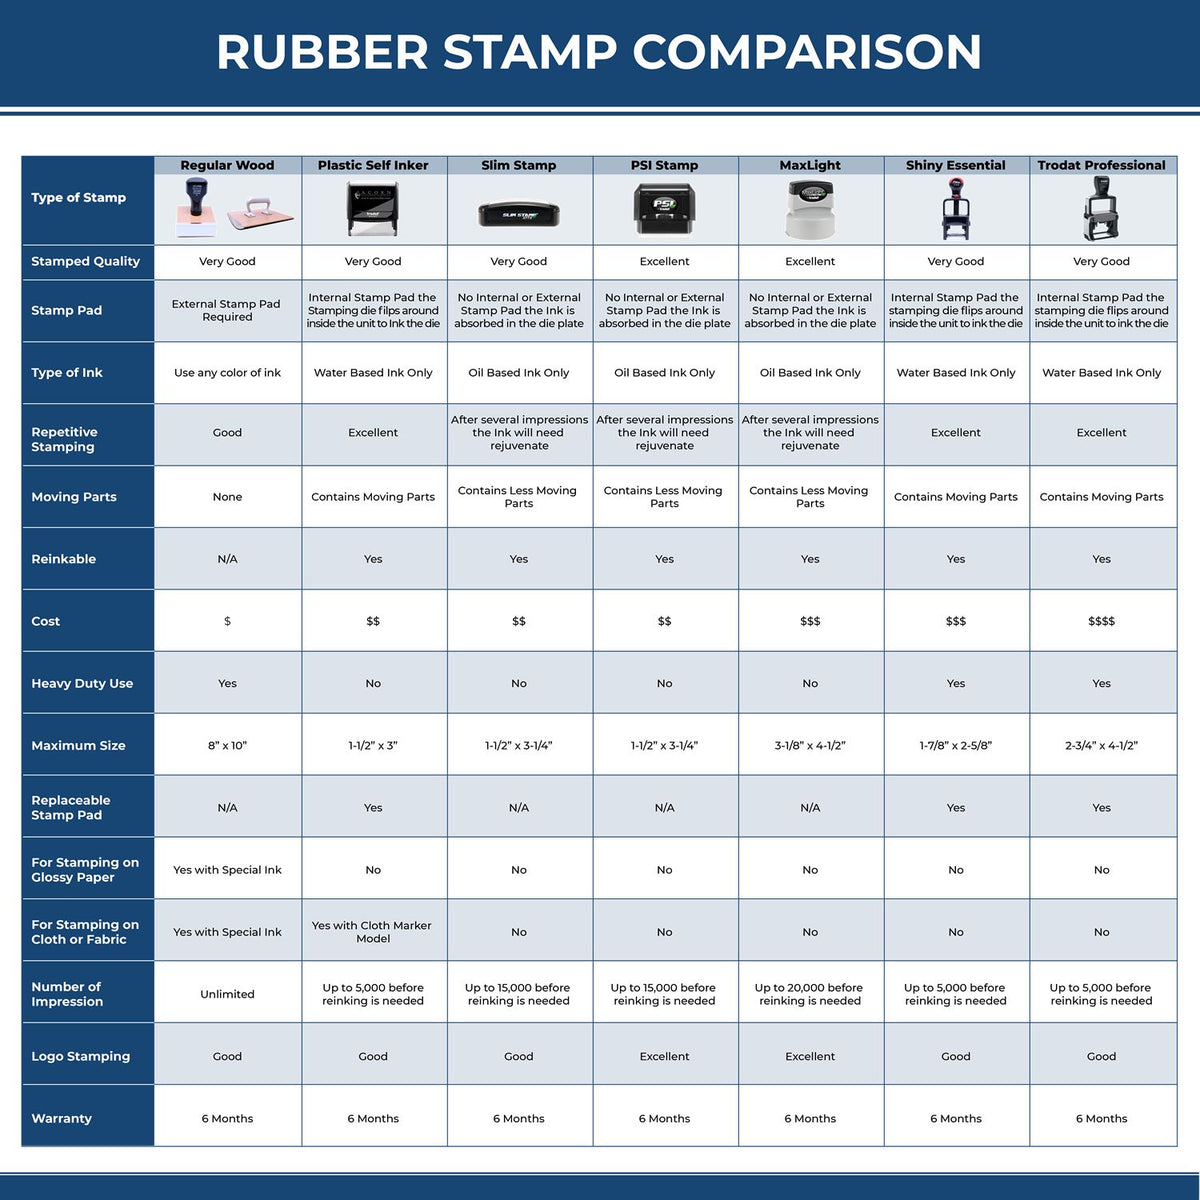 Large Faxed on Rubber Stamp 4879R Rubber Stamp Comparison